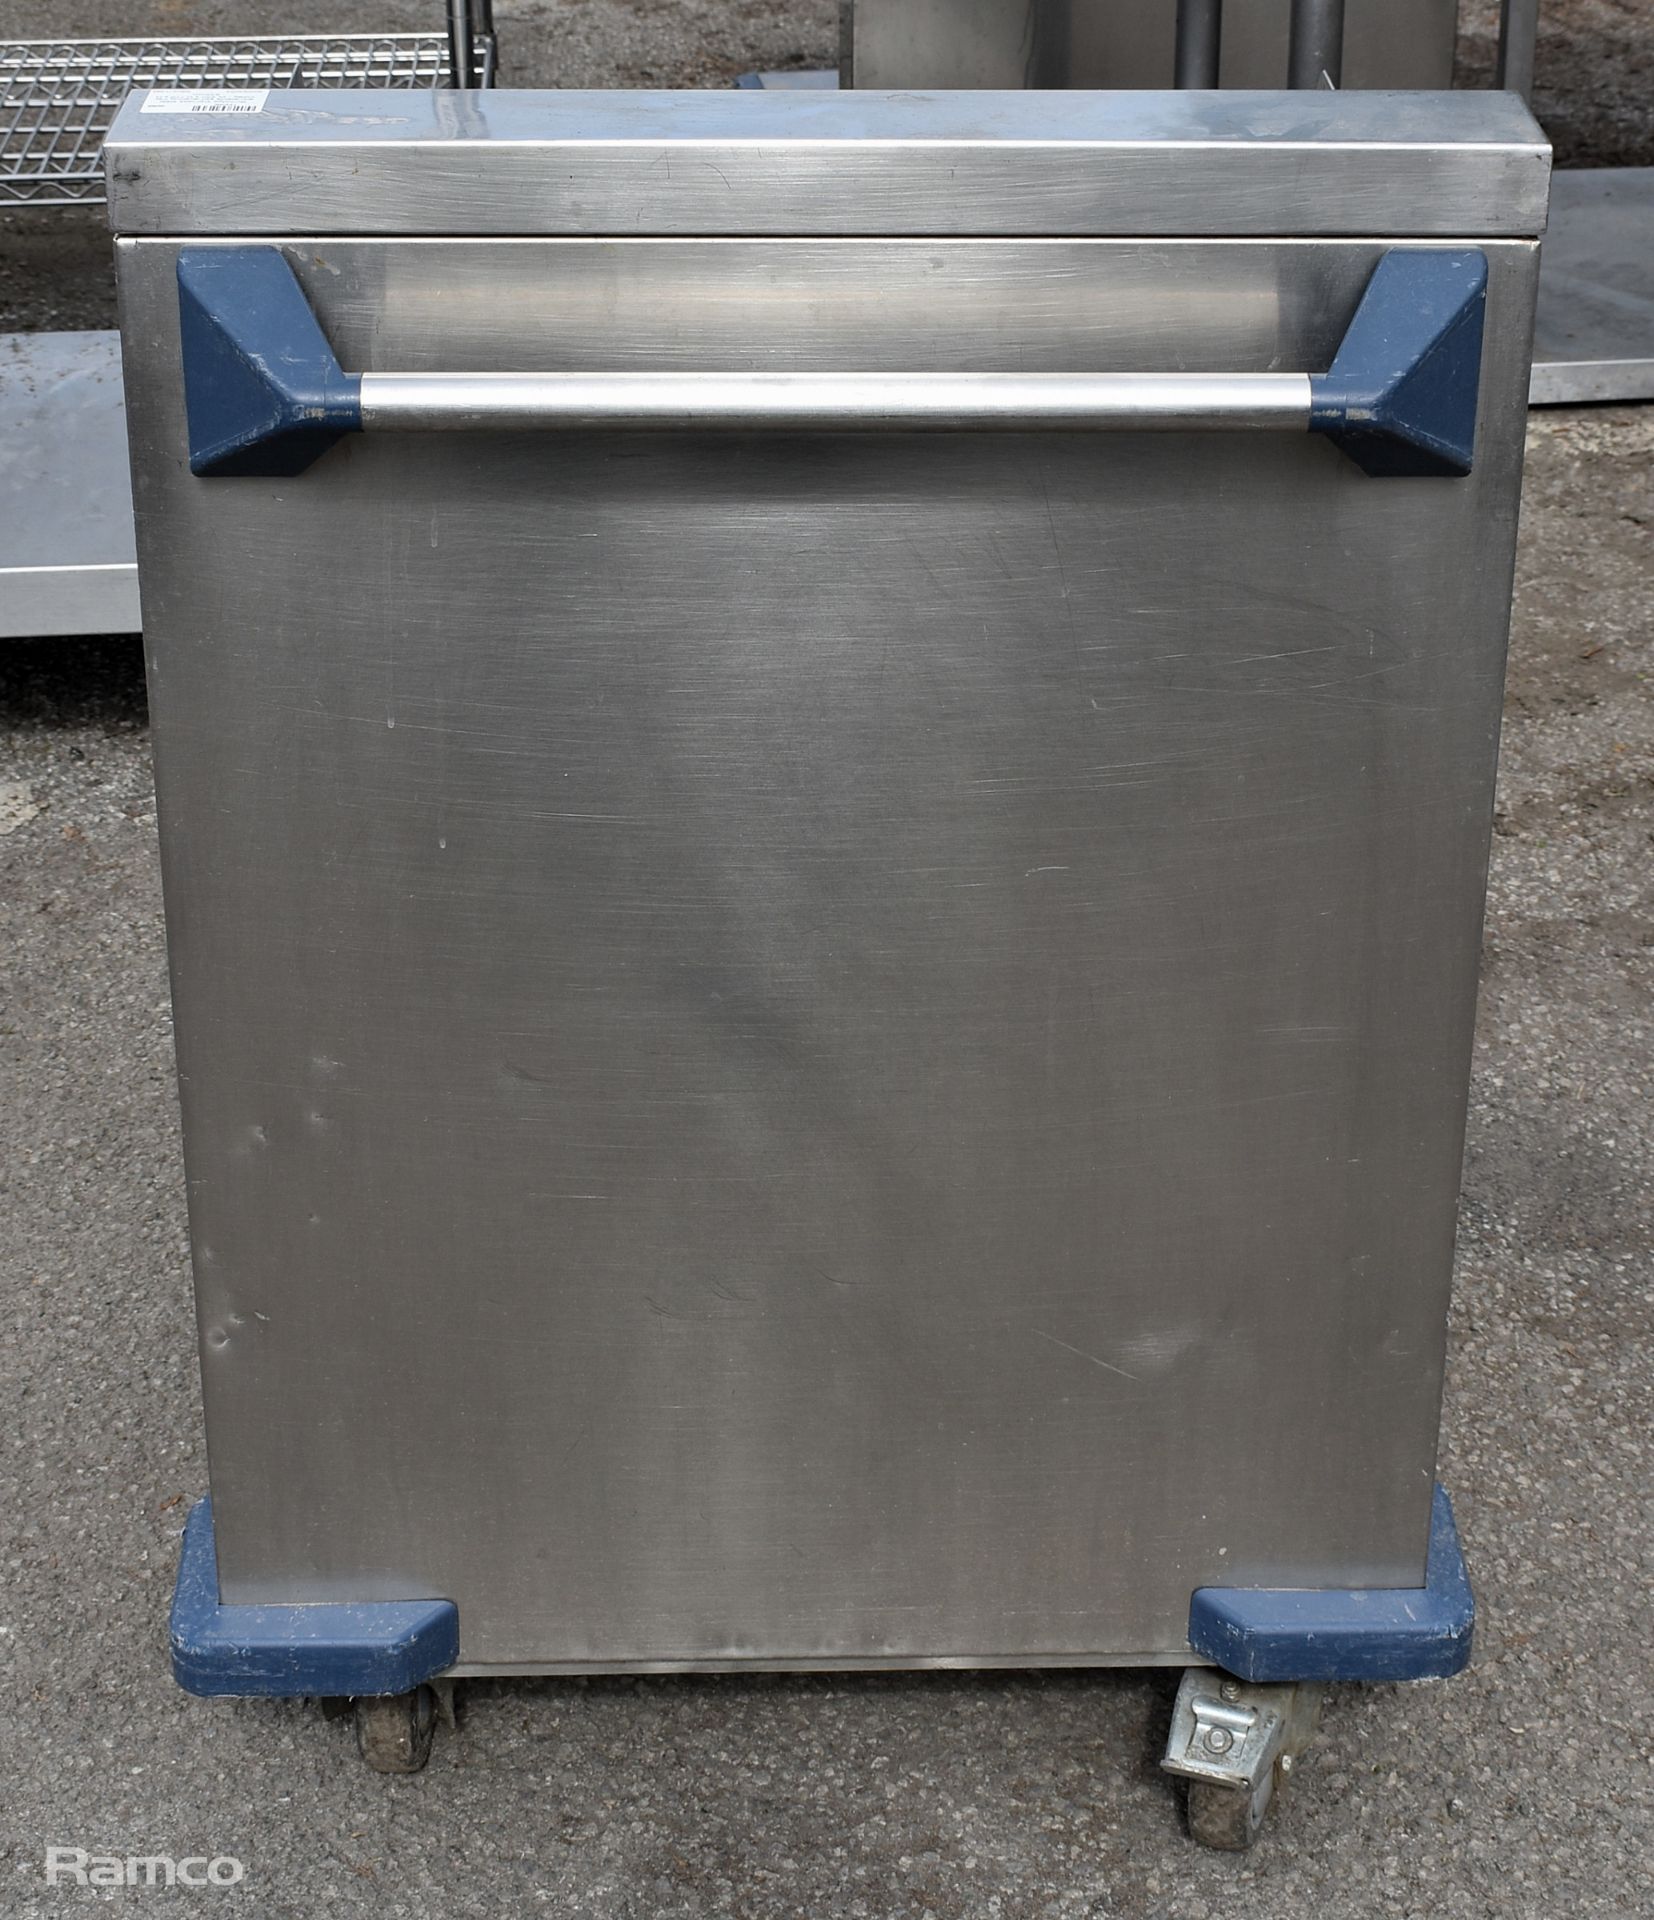 Burlodge stainless steel adjustable self-levelling tray trolley - W 650 x D 770 x H 935mm - Image 3 of 4